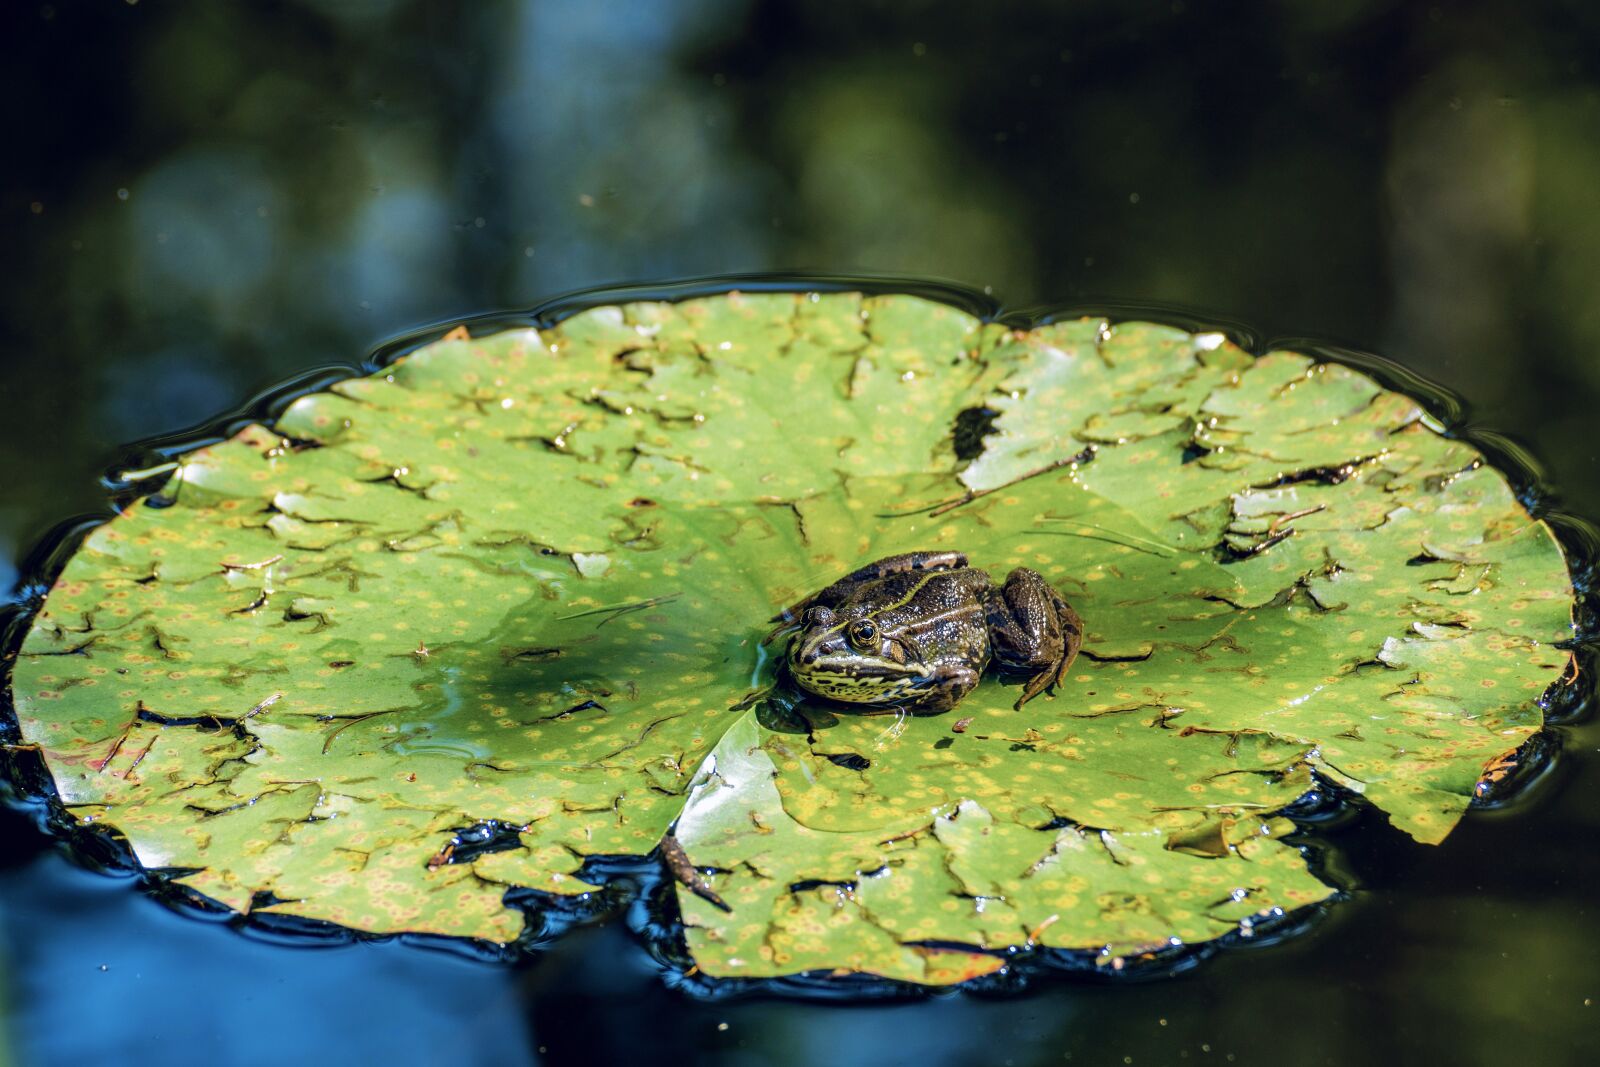 Sony a7R III sample photo. Frog, lily pad, garden photography